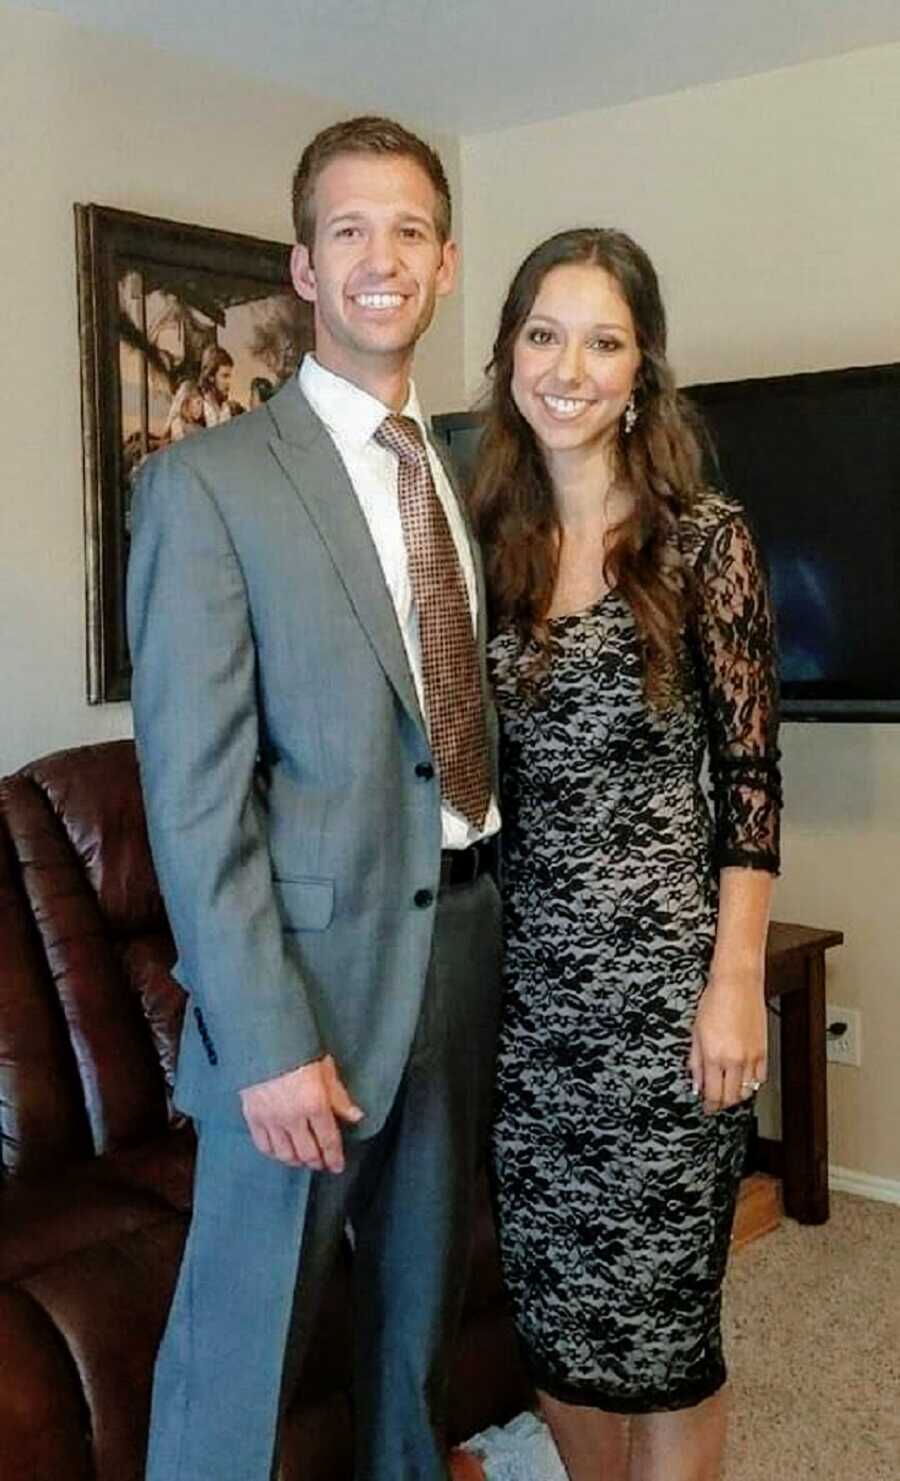 A woman and her husband together dressed up for an event